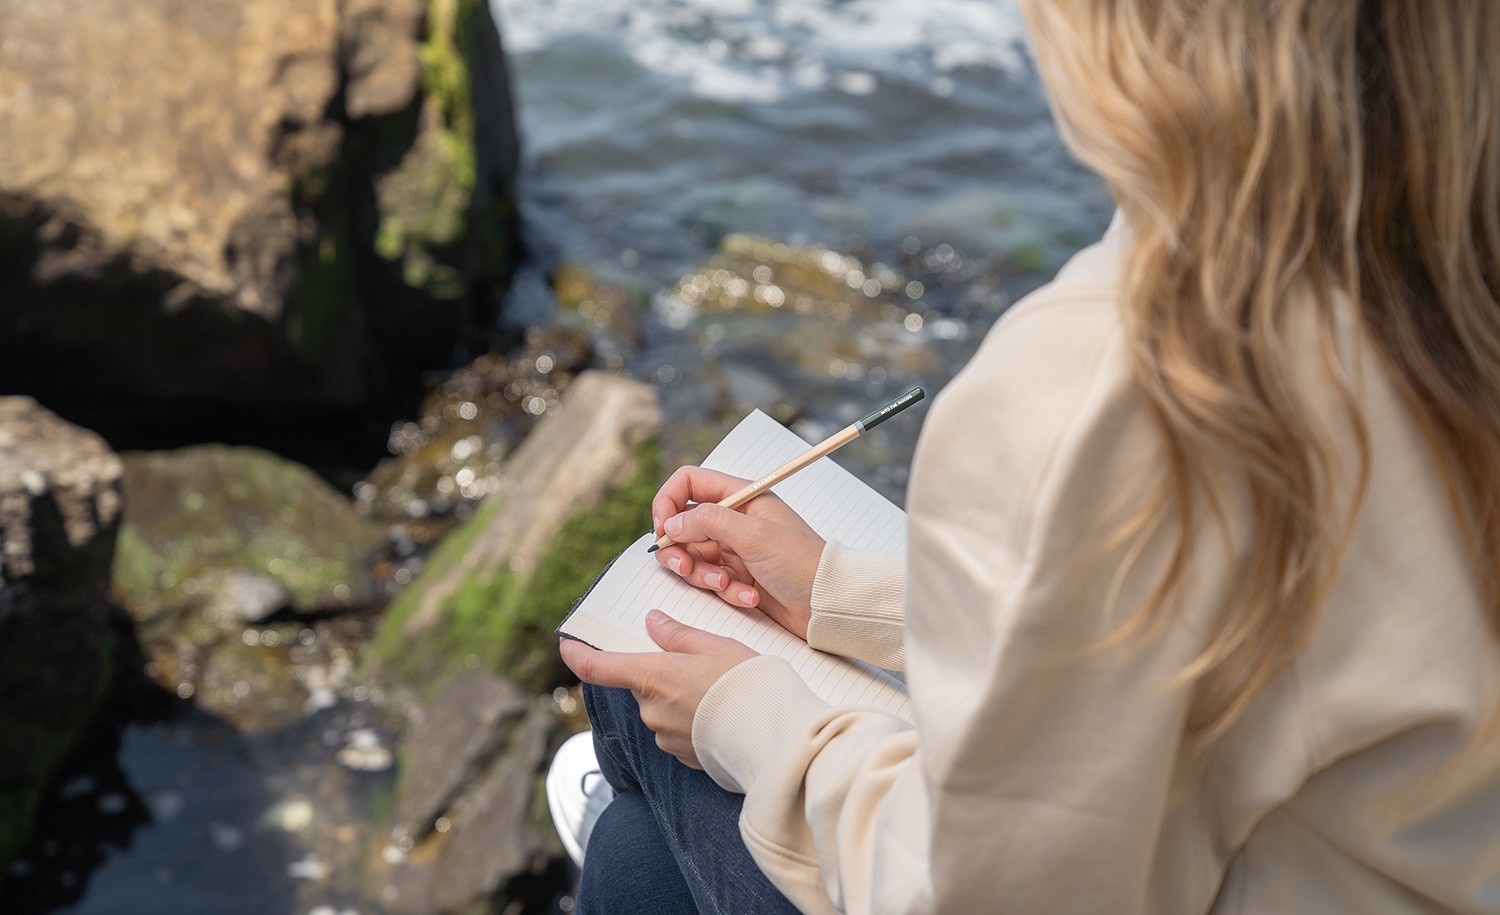 An introvert journals by the water